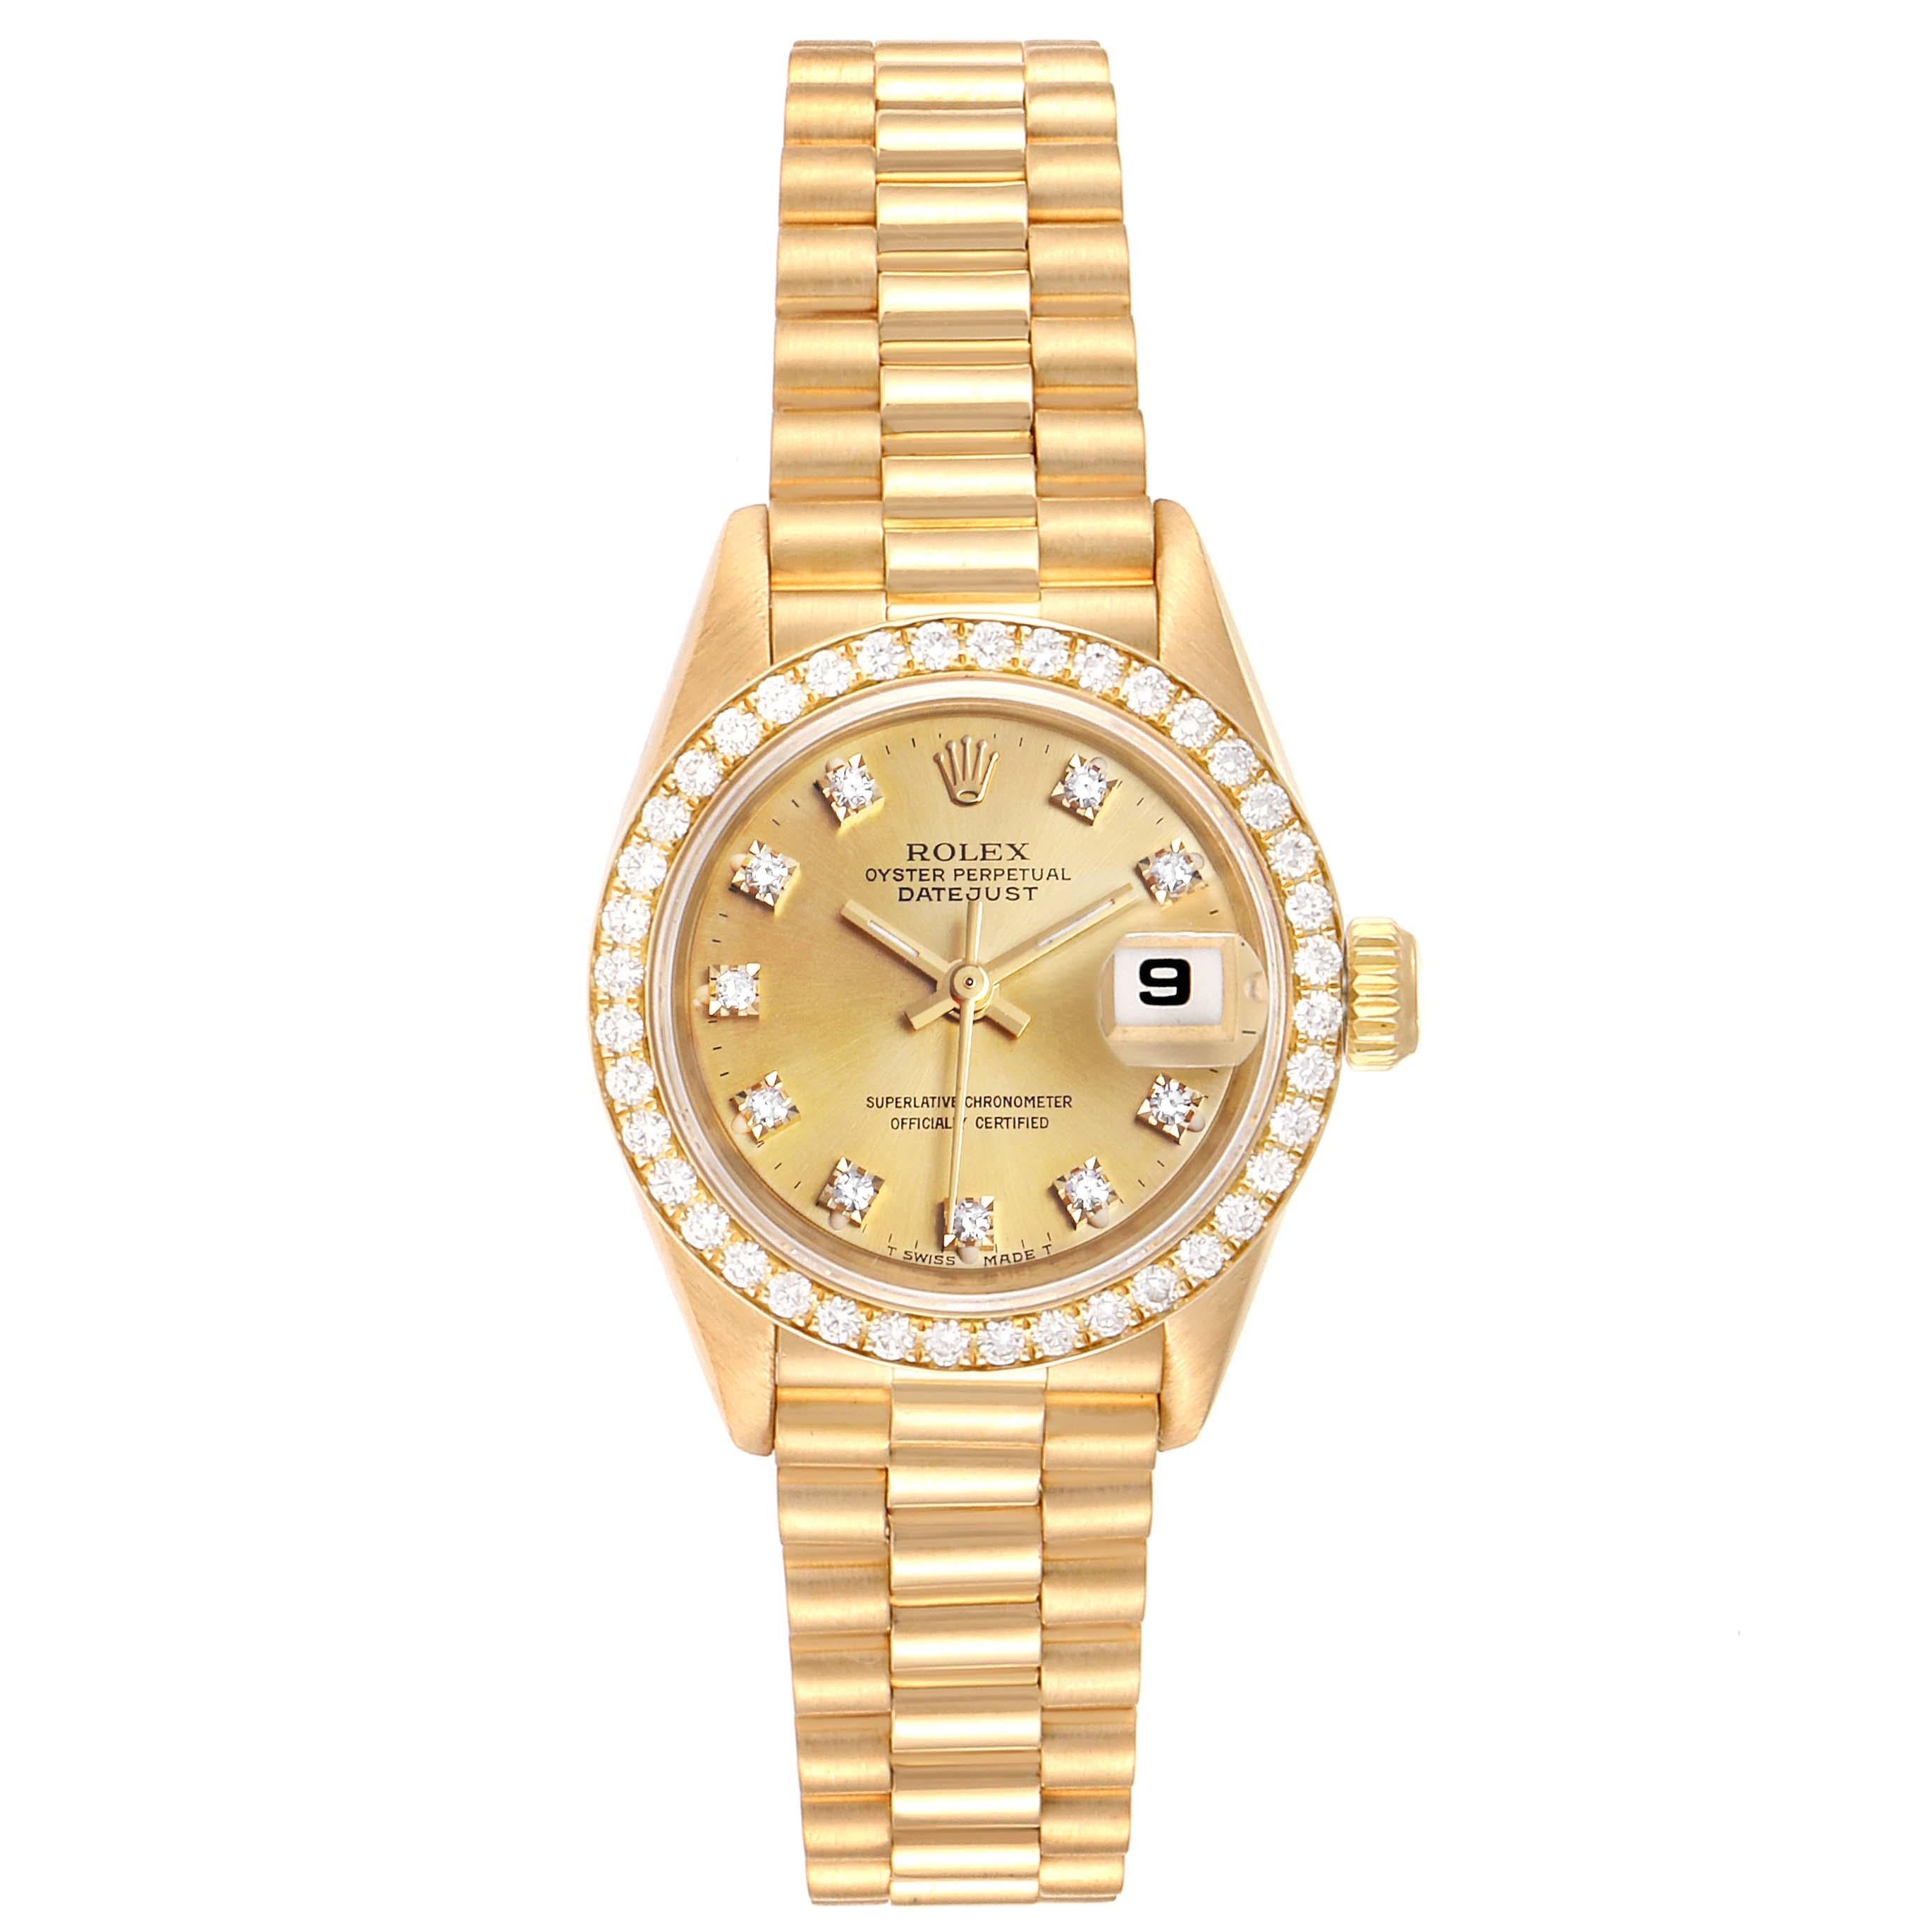 Rolex President Datejust 26mm Yellow Gold Diamond Ladies Watch 69138. Officially certified chronometer self-winding movement. 18k yellow gold oyster case 26.0 mm in diameter. Rolex logo on a crown. Original Rolex 18k yellow gold diamond bezel.